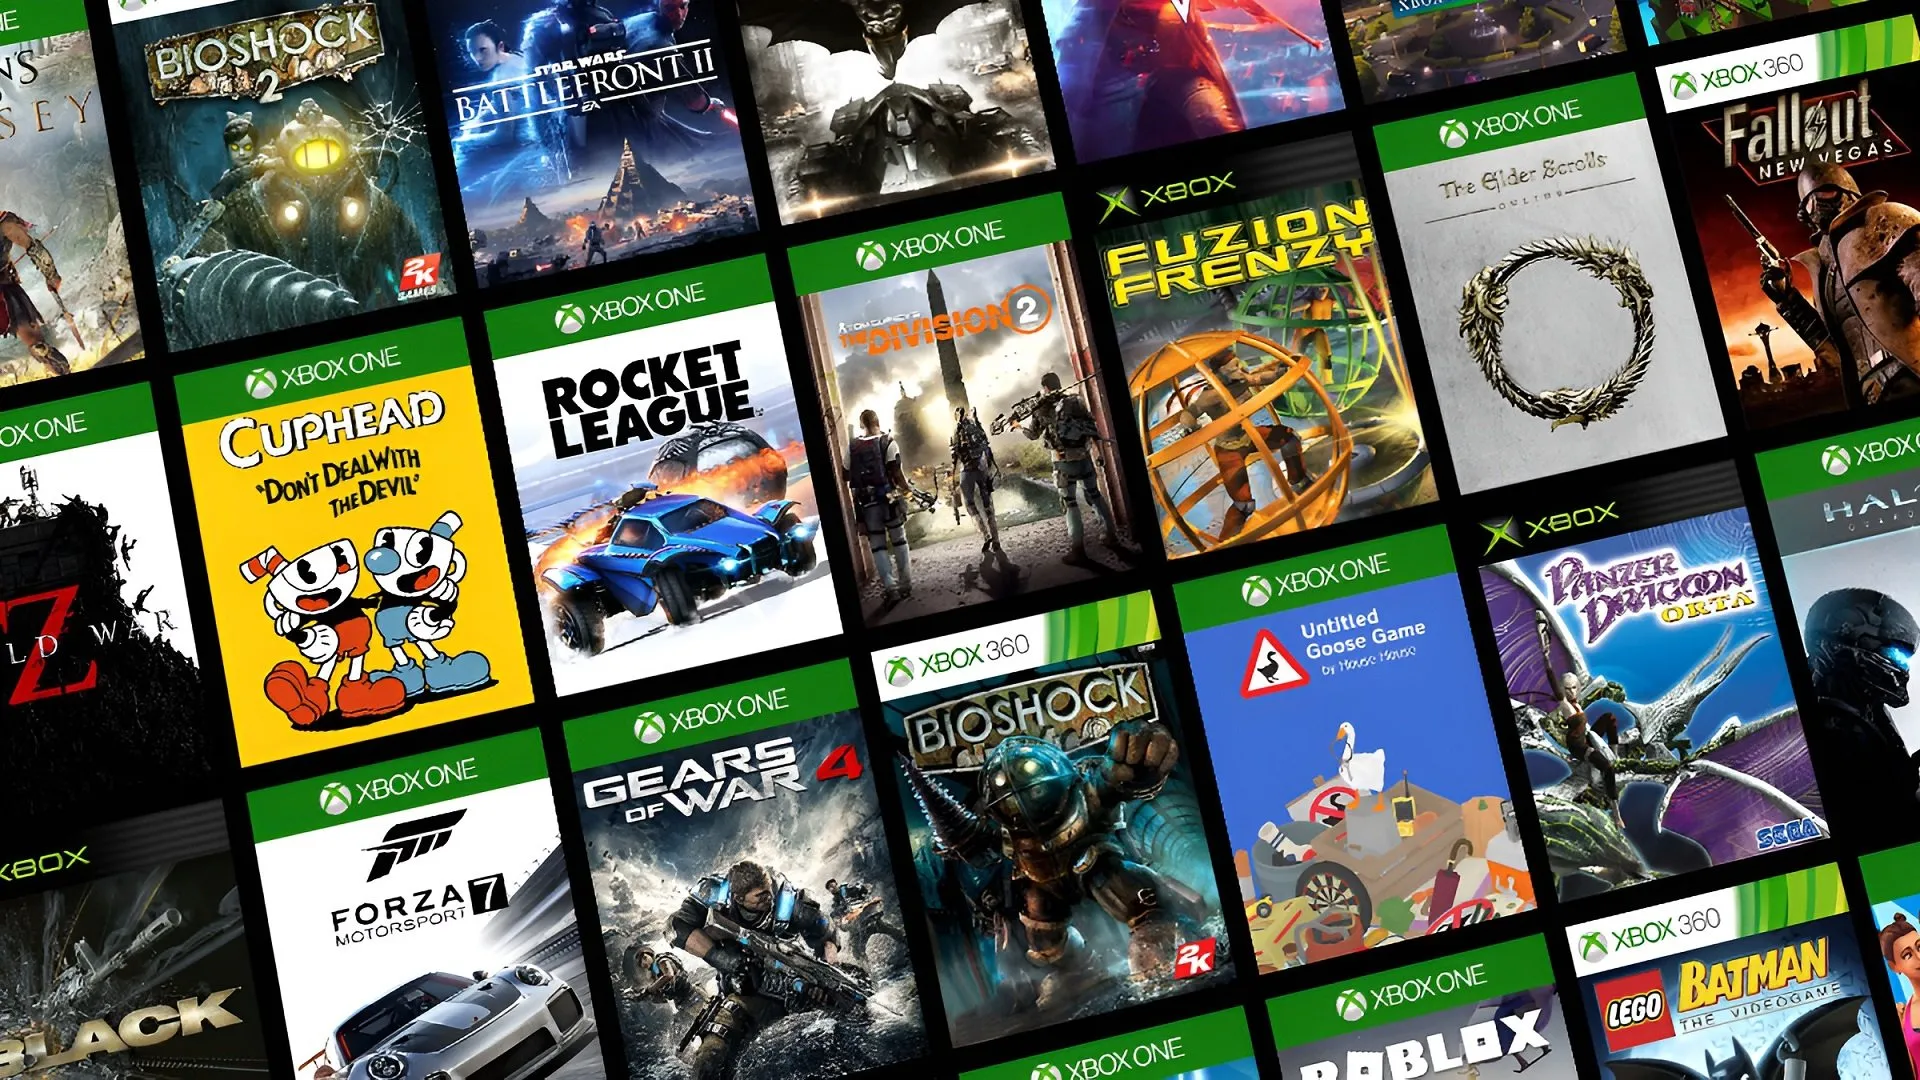 Comorama Vlucht Inspireren What are the best co-op games for Xbox One? - Game Freaks 365